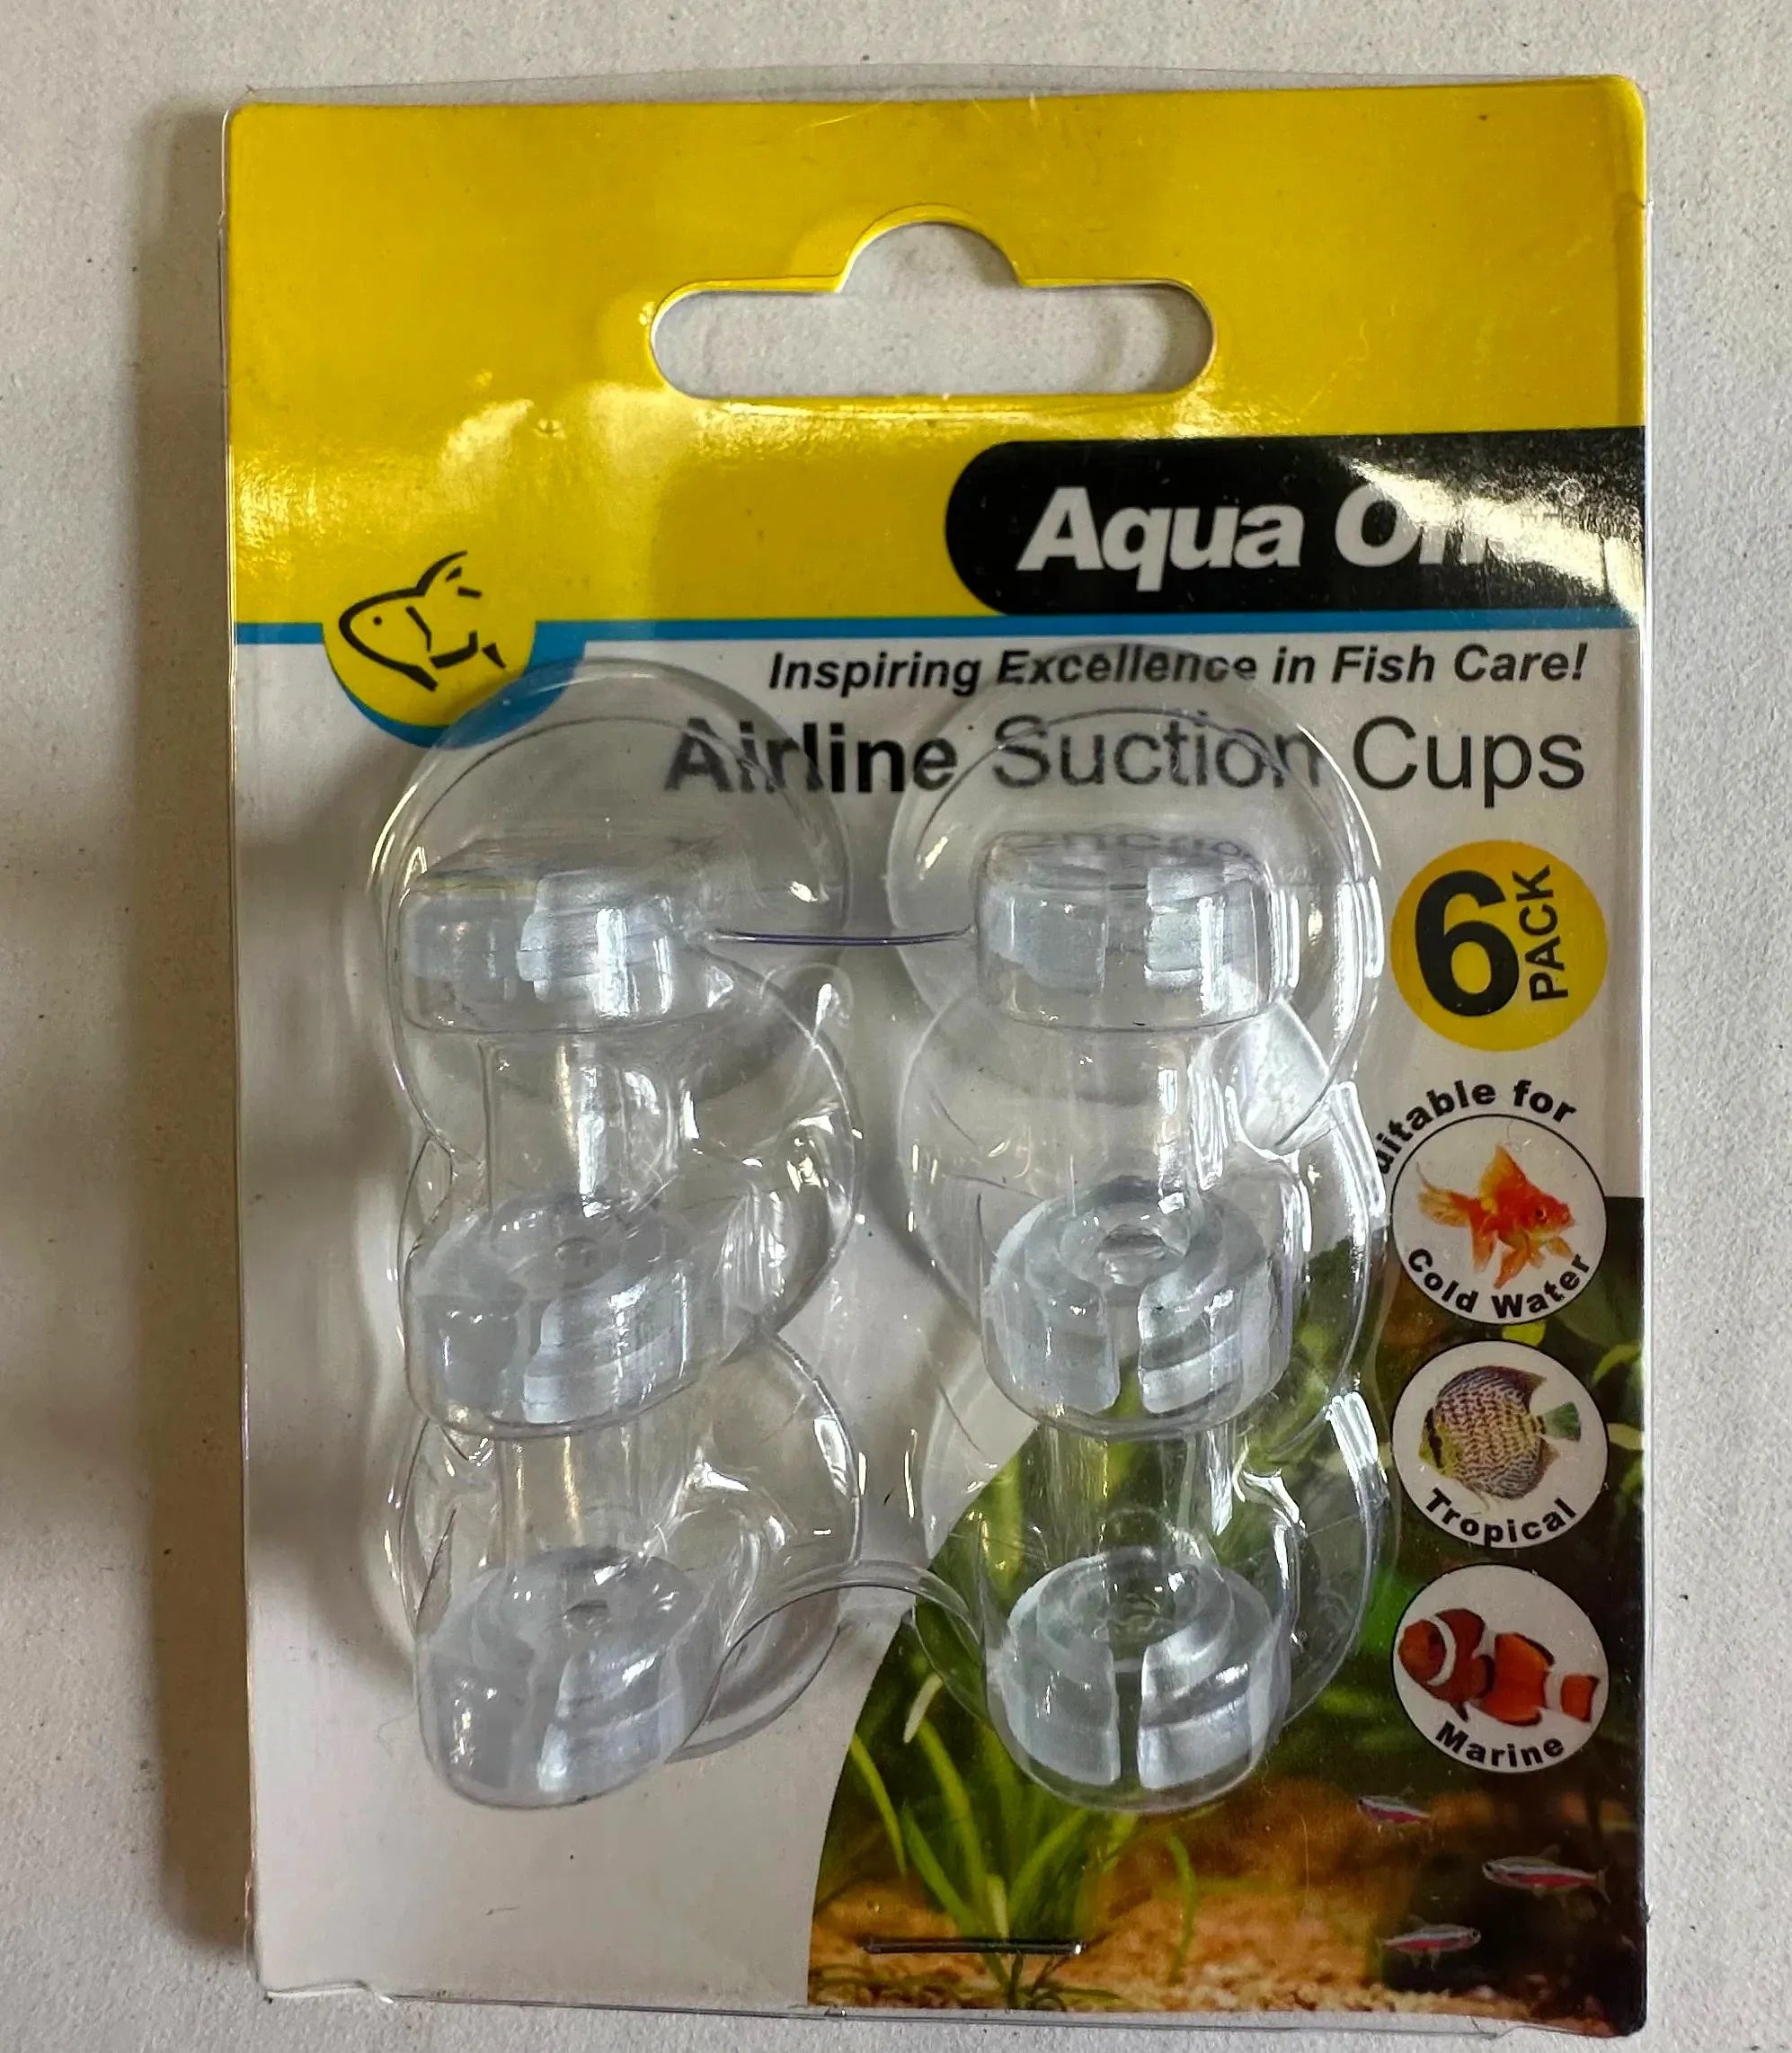 Aqua One Airline Suction Cups (6pk)